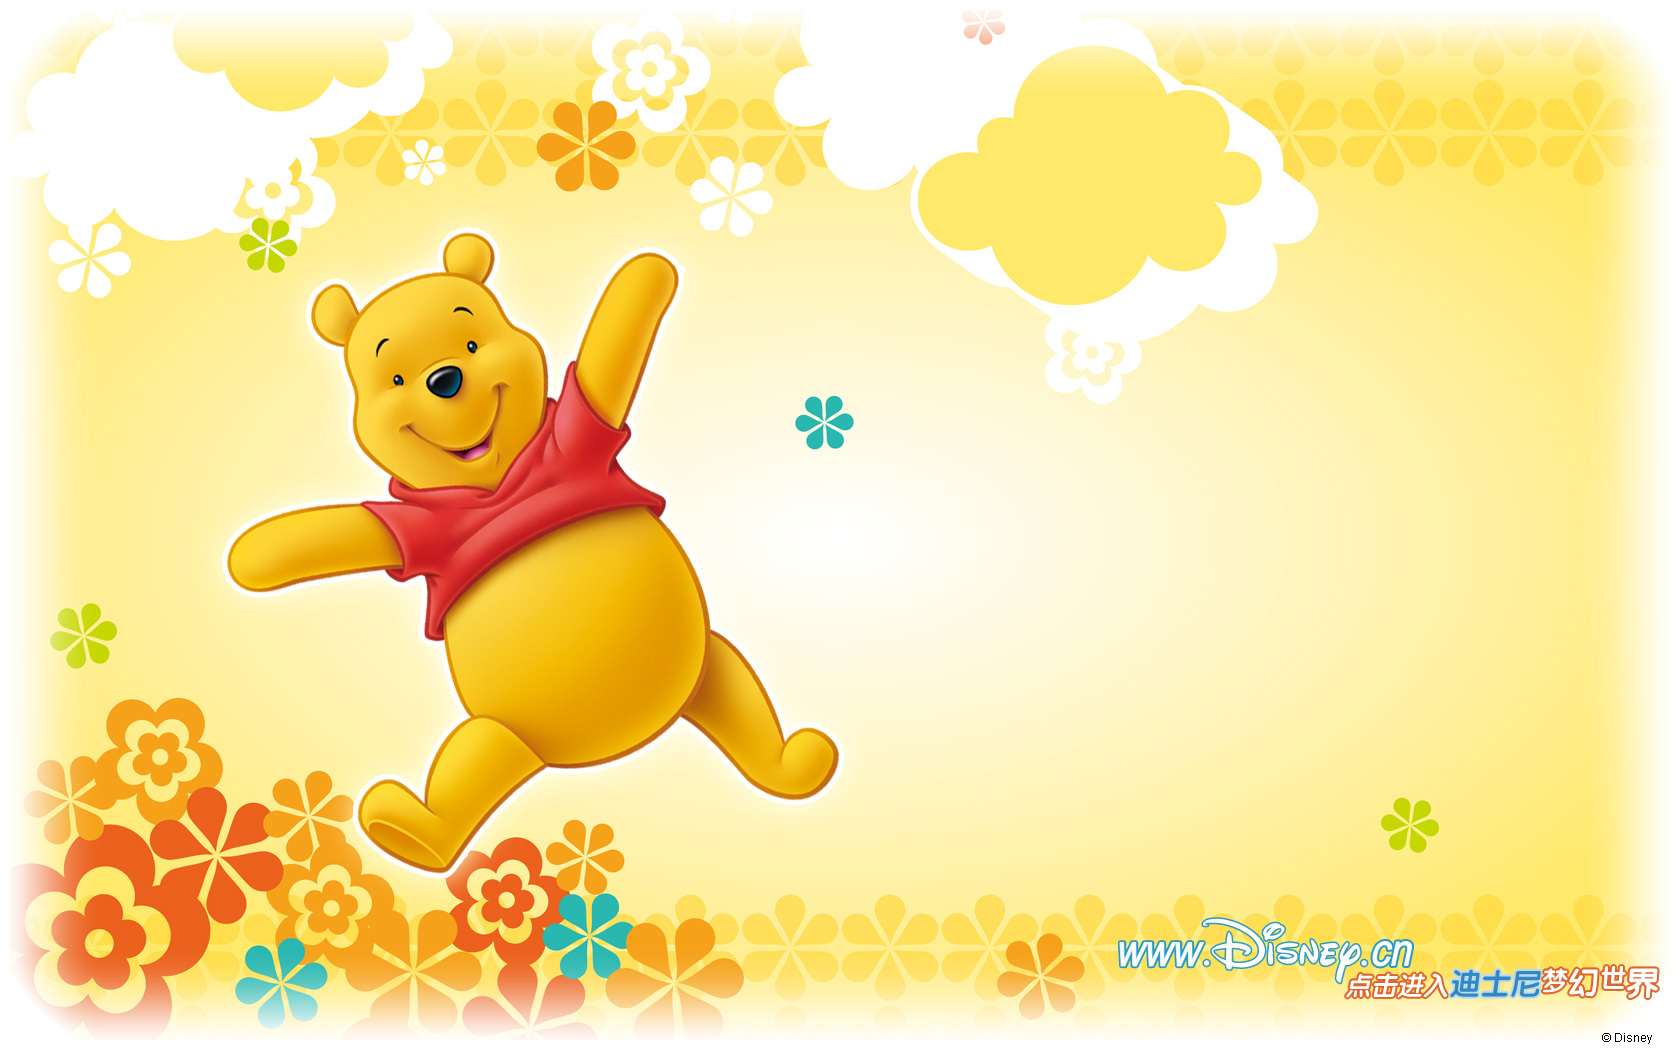 Winnie The Pooh And Friends Cartoon Image For Desktop Hd Wallpaper For Pc  Tablet And Mobile 2560x1600  Wallpapers13com